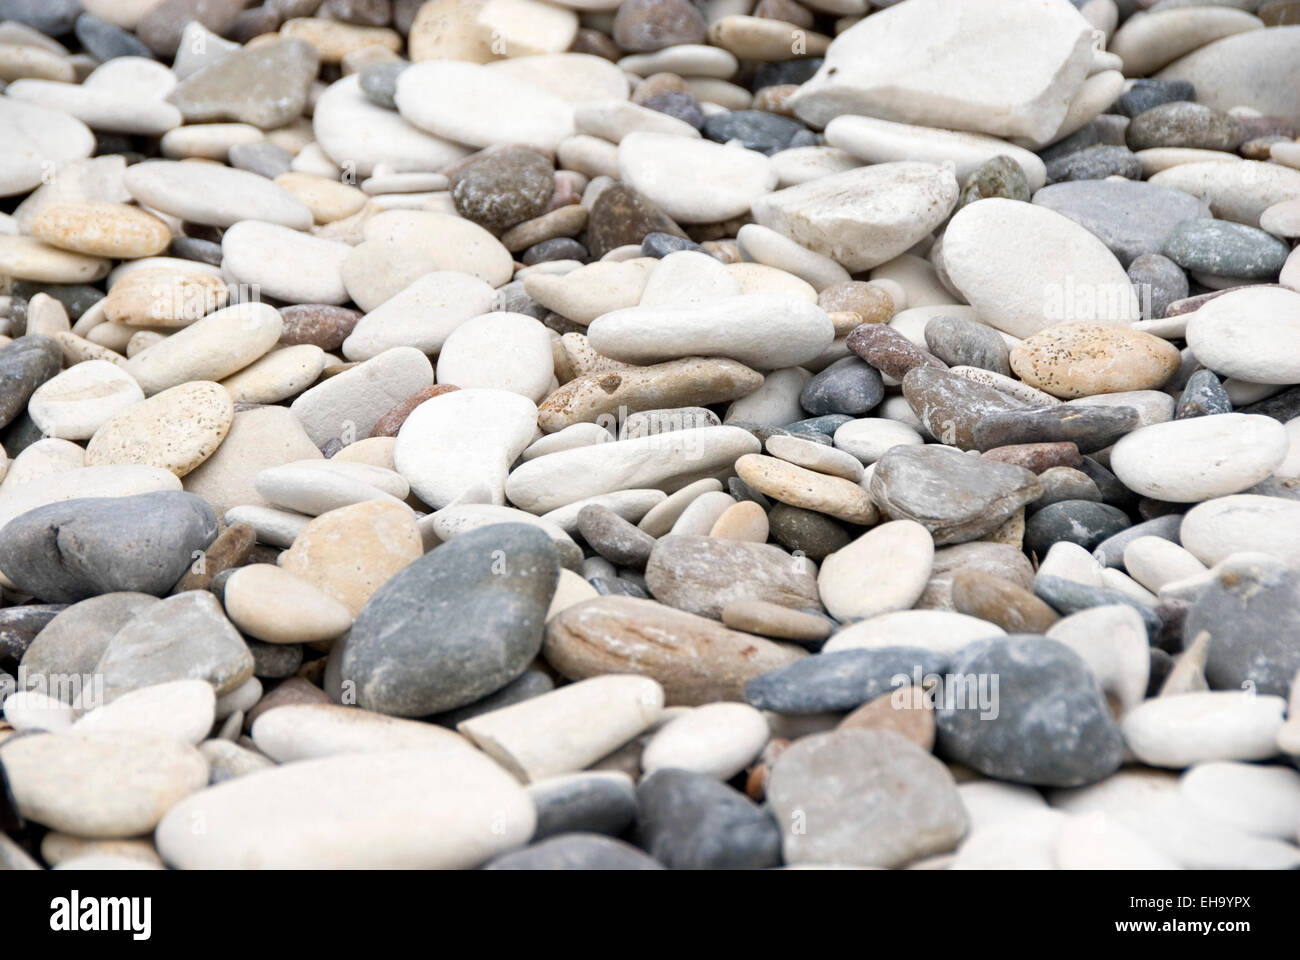 Rounded pebbles in shades of grey, blue, white, cream and orange scatter the beach at Bridlington, UK Stock Photo